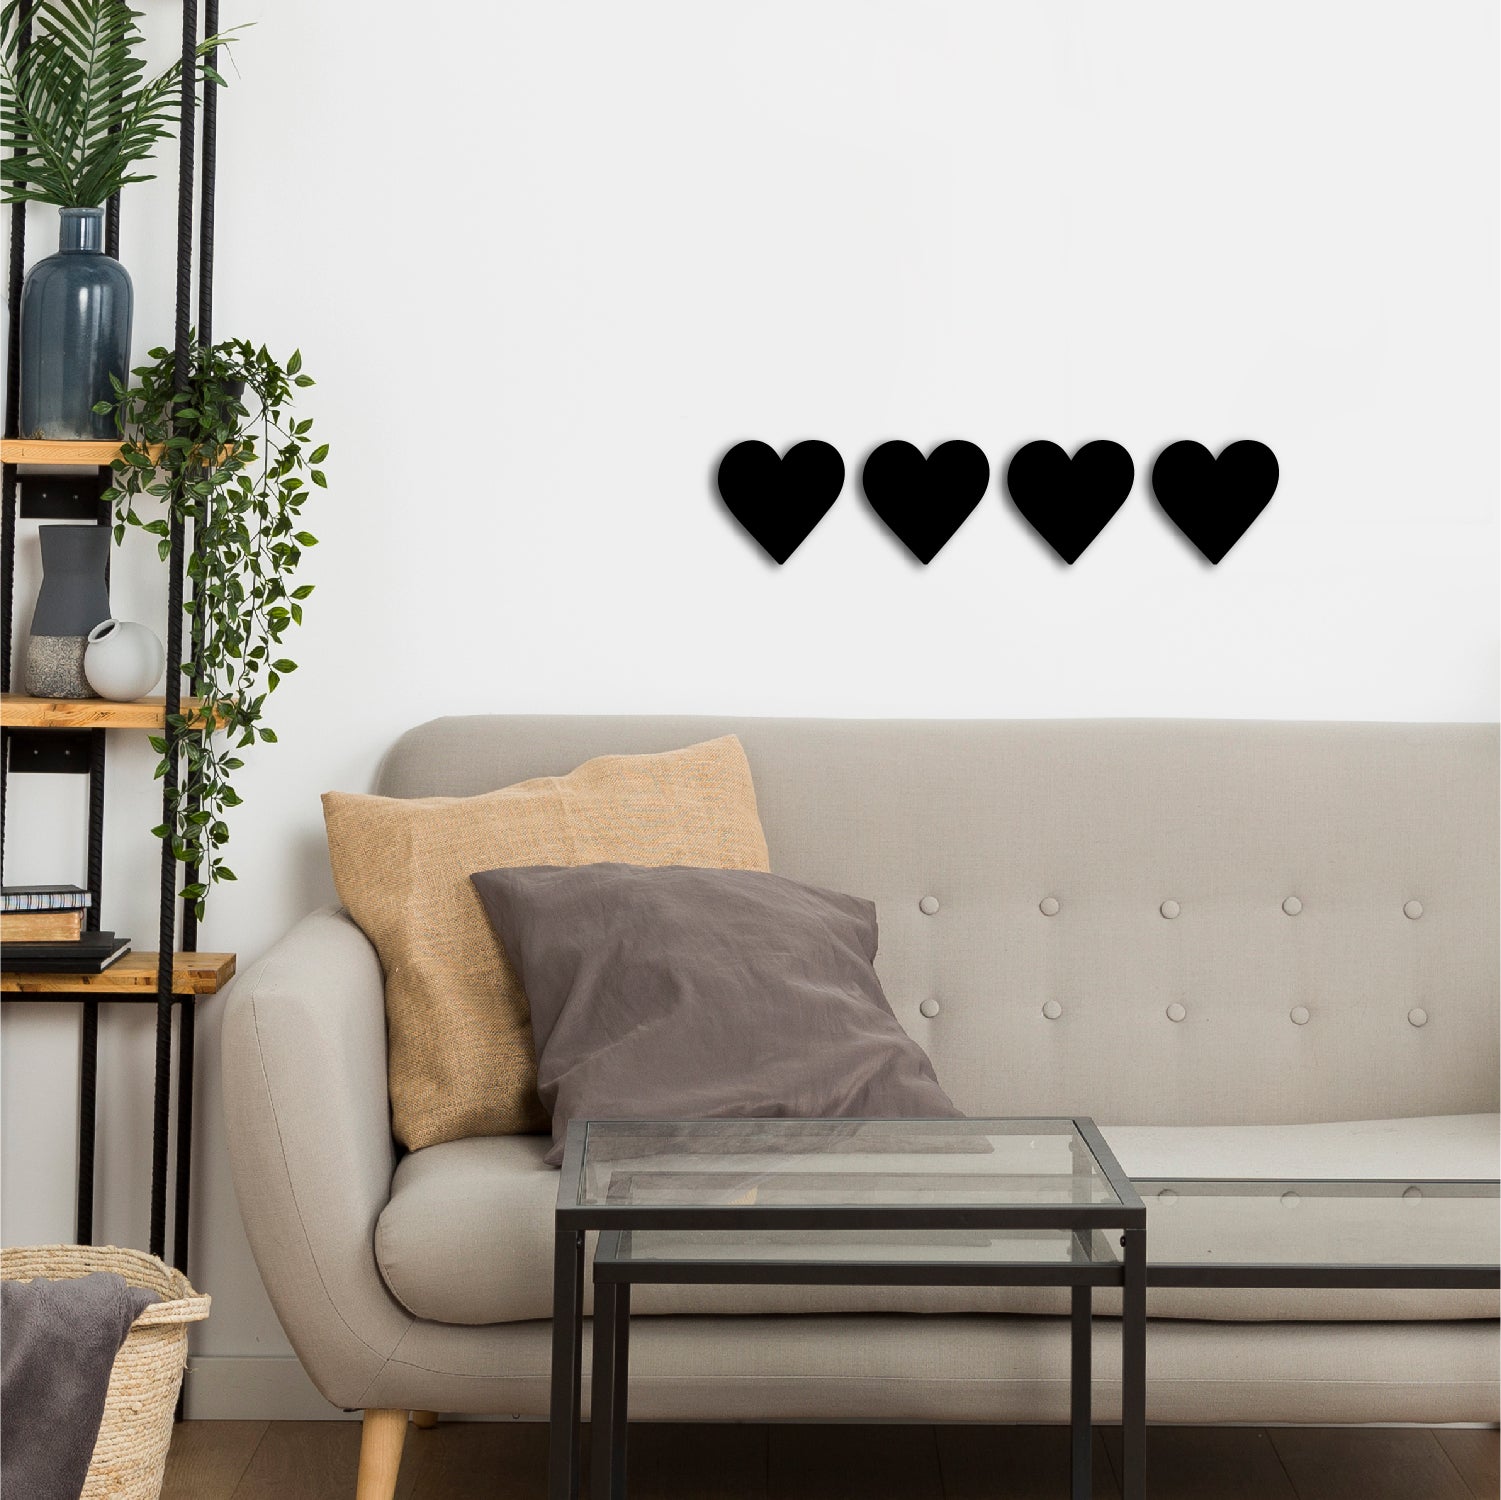 Set of 4 "Hearts" Black MDF Engineered Wooden Wall Art/Hanging Cutout for Home Décor 4